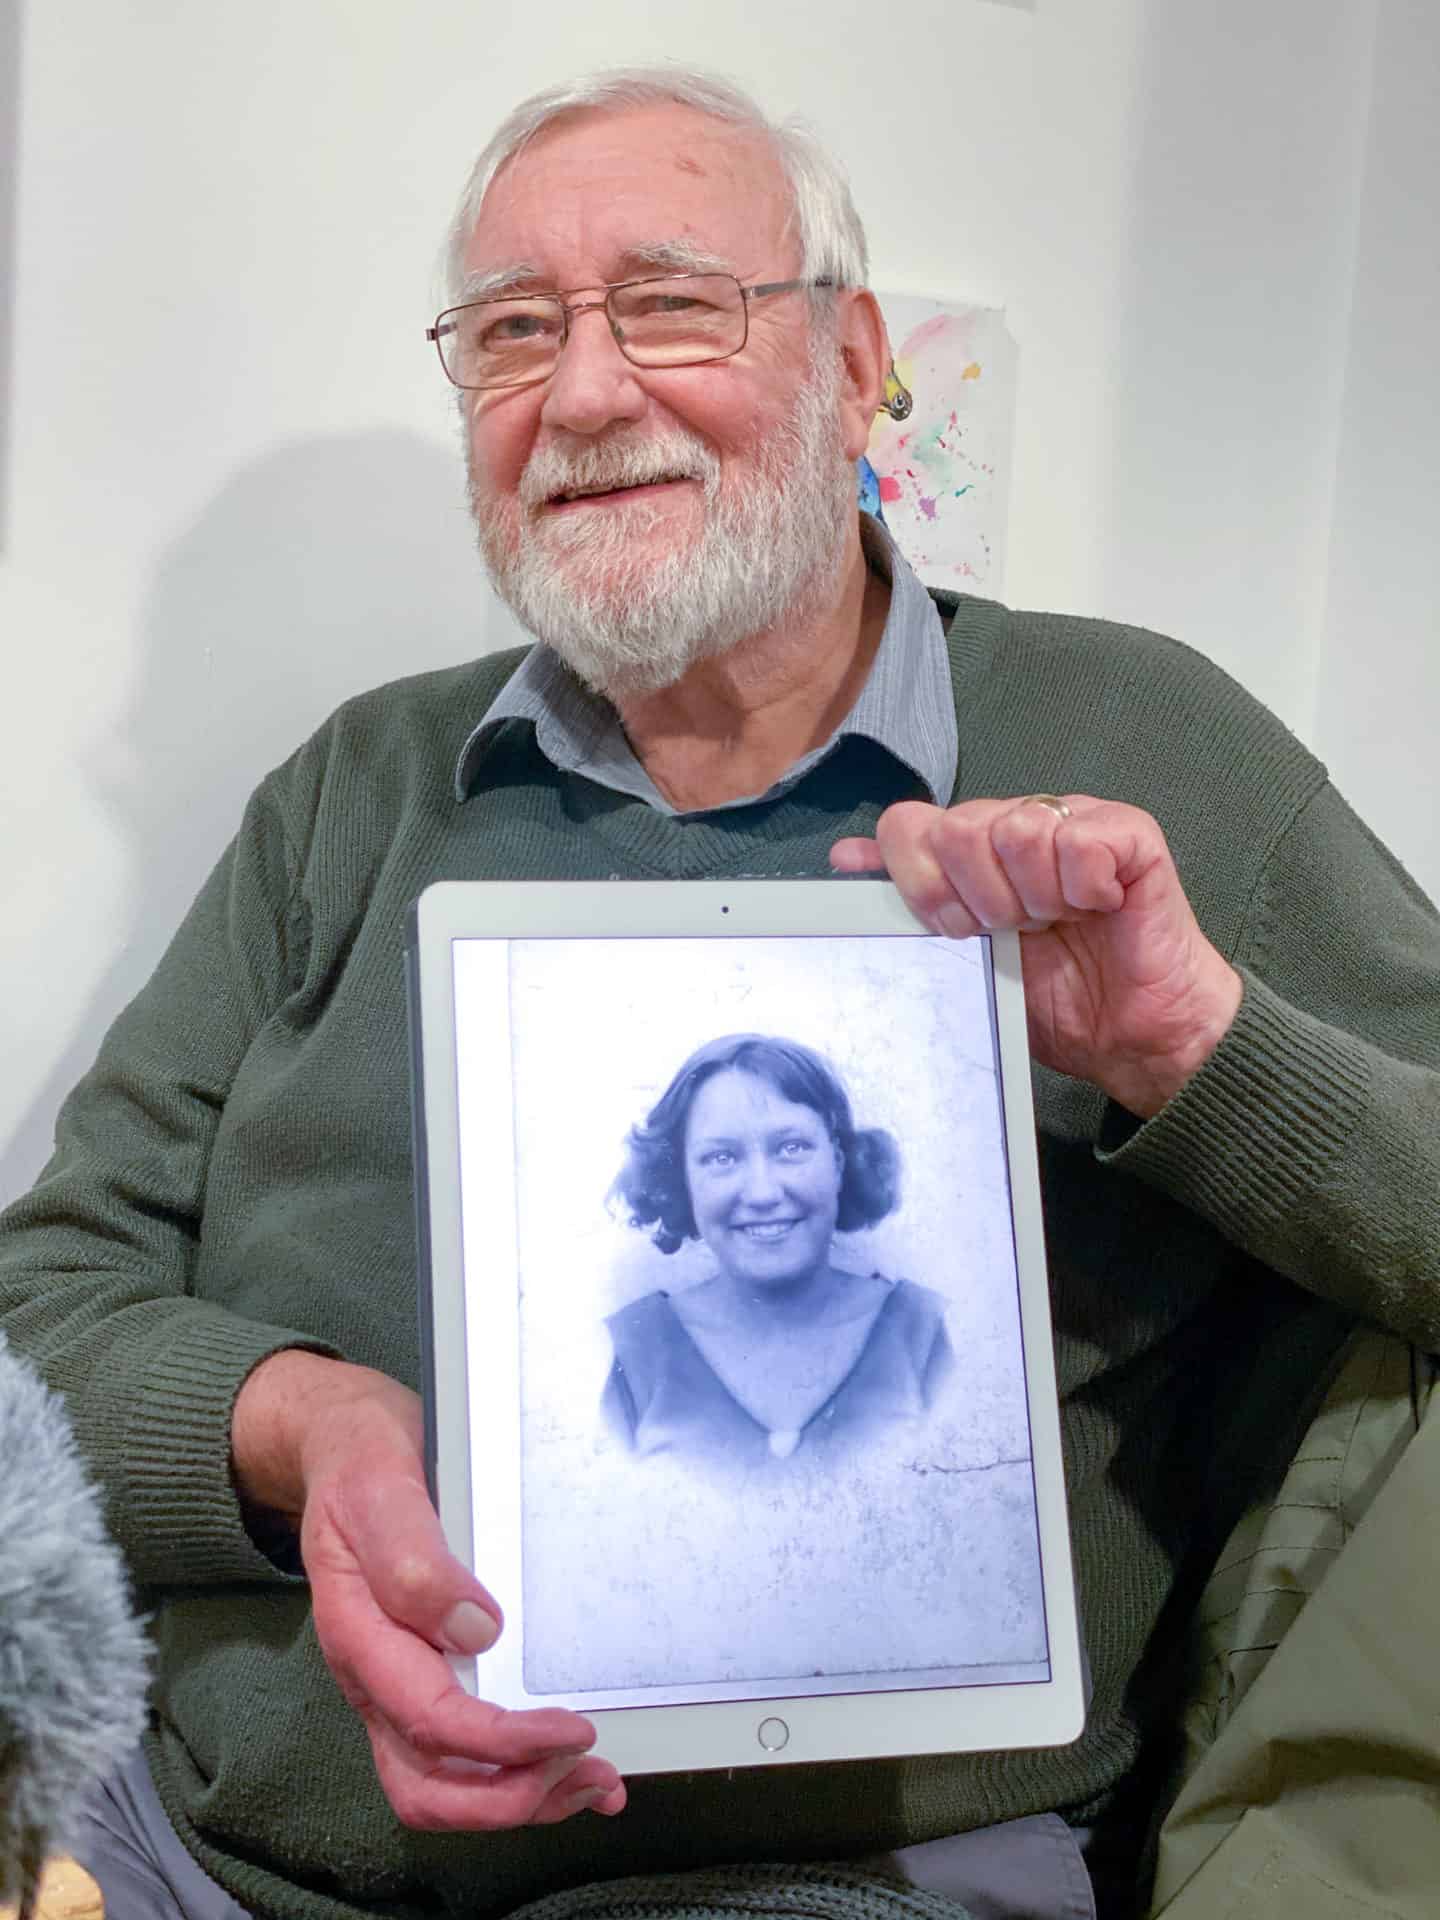 My dad with a photo of his mom Rose at Gather café Dudley 2019